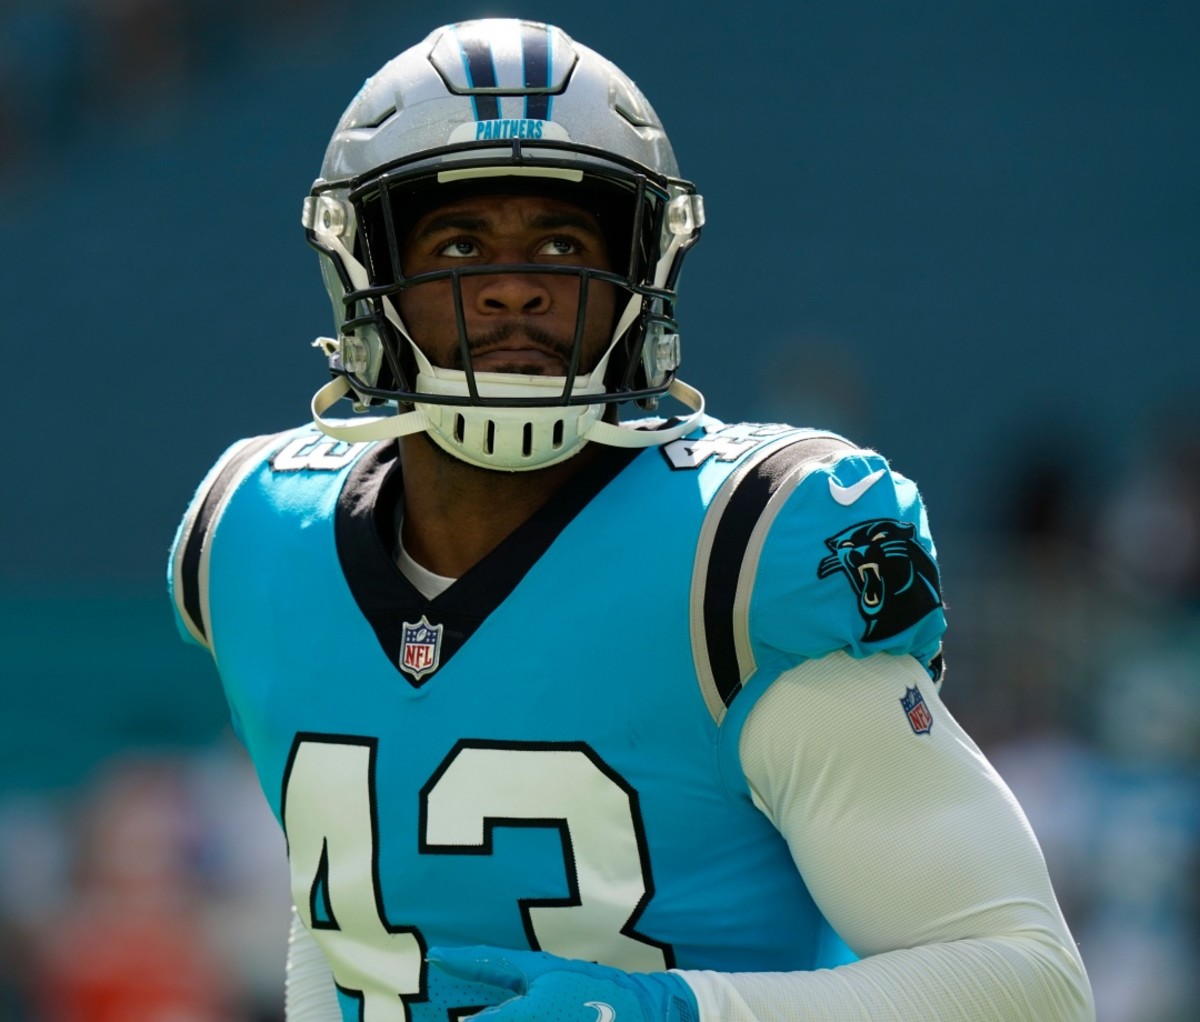 NFL Free Agents 2022 Haason Reddick in his Panthers uniform staring up and ahead